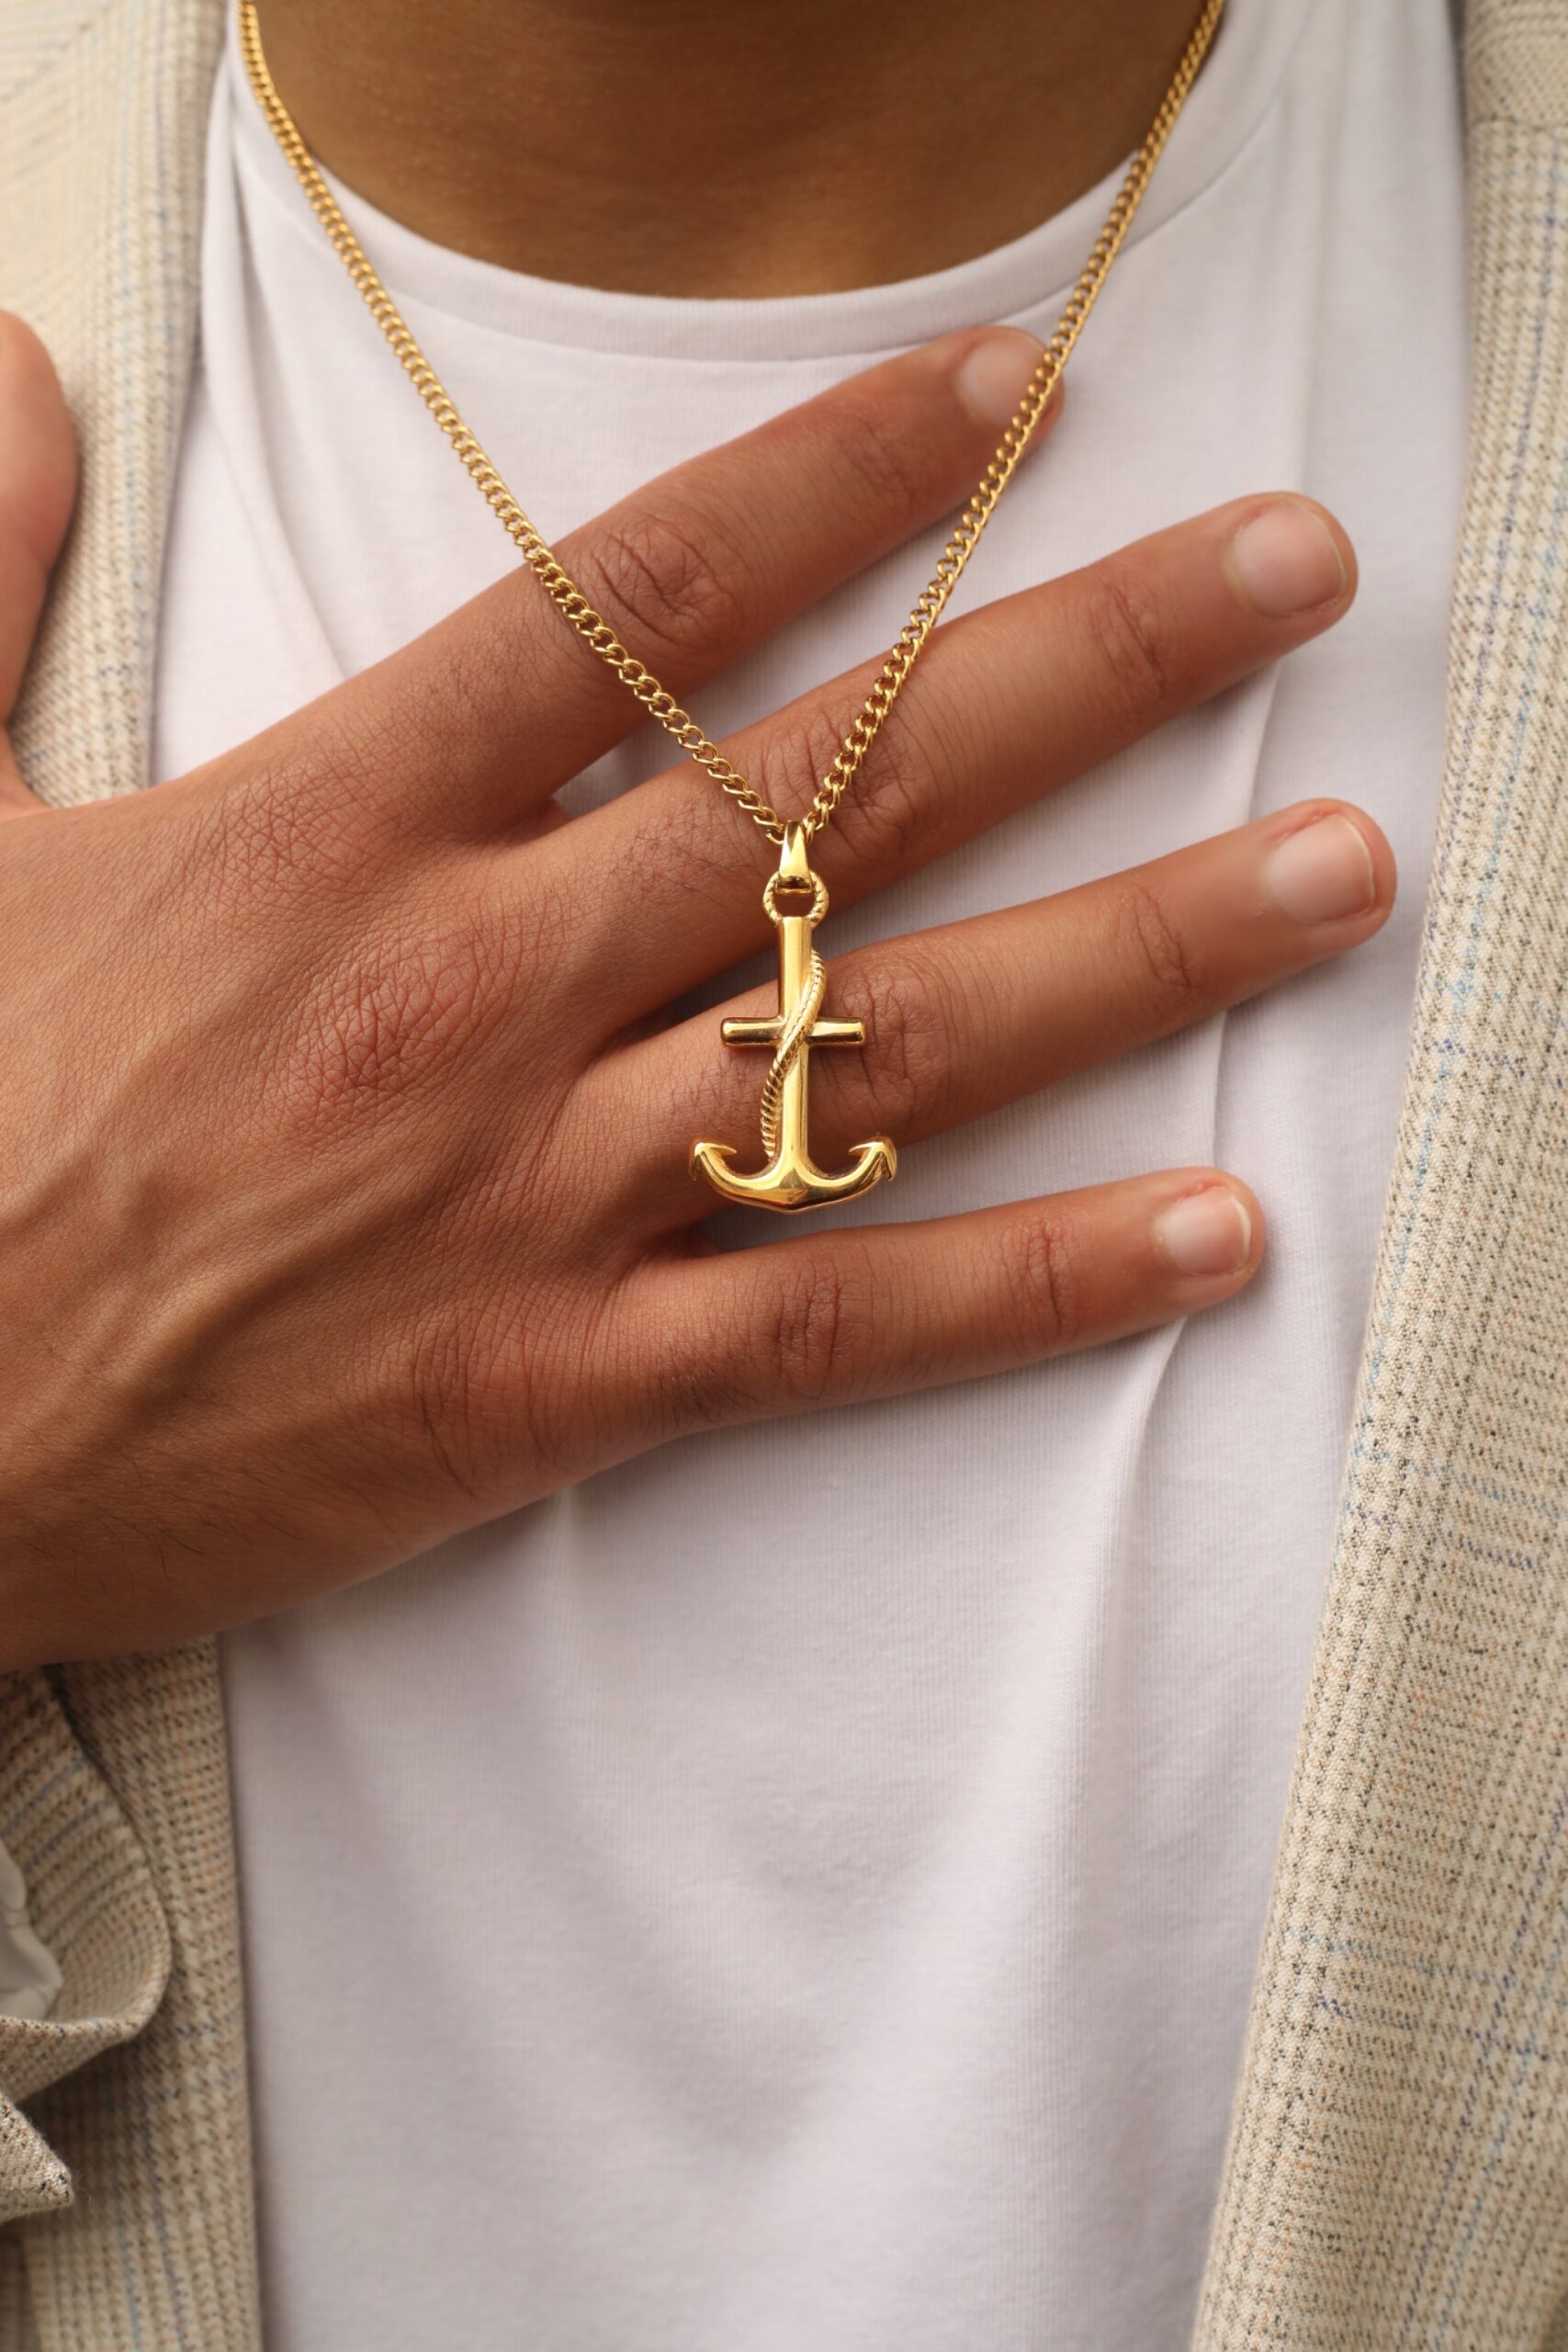 Jolly Roger Anchor Pendant *10k/14k/18k White, Yellow, Rose Green Gold, Gold  Plated & Silver* Boat Ship Sailor Navy Sea Charm Necklace Gift | Loni  Design Group $384.03 | 10k Gold, 14k Gold ,